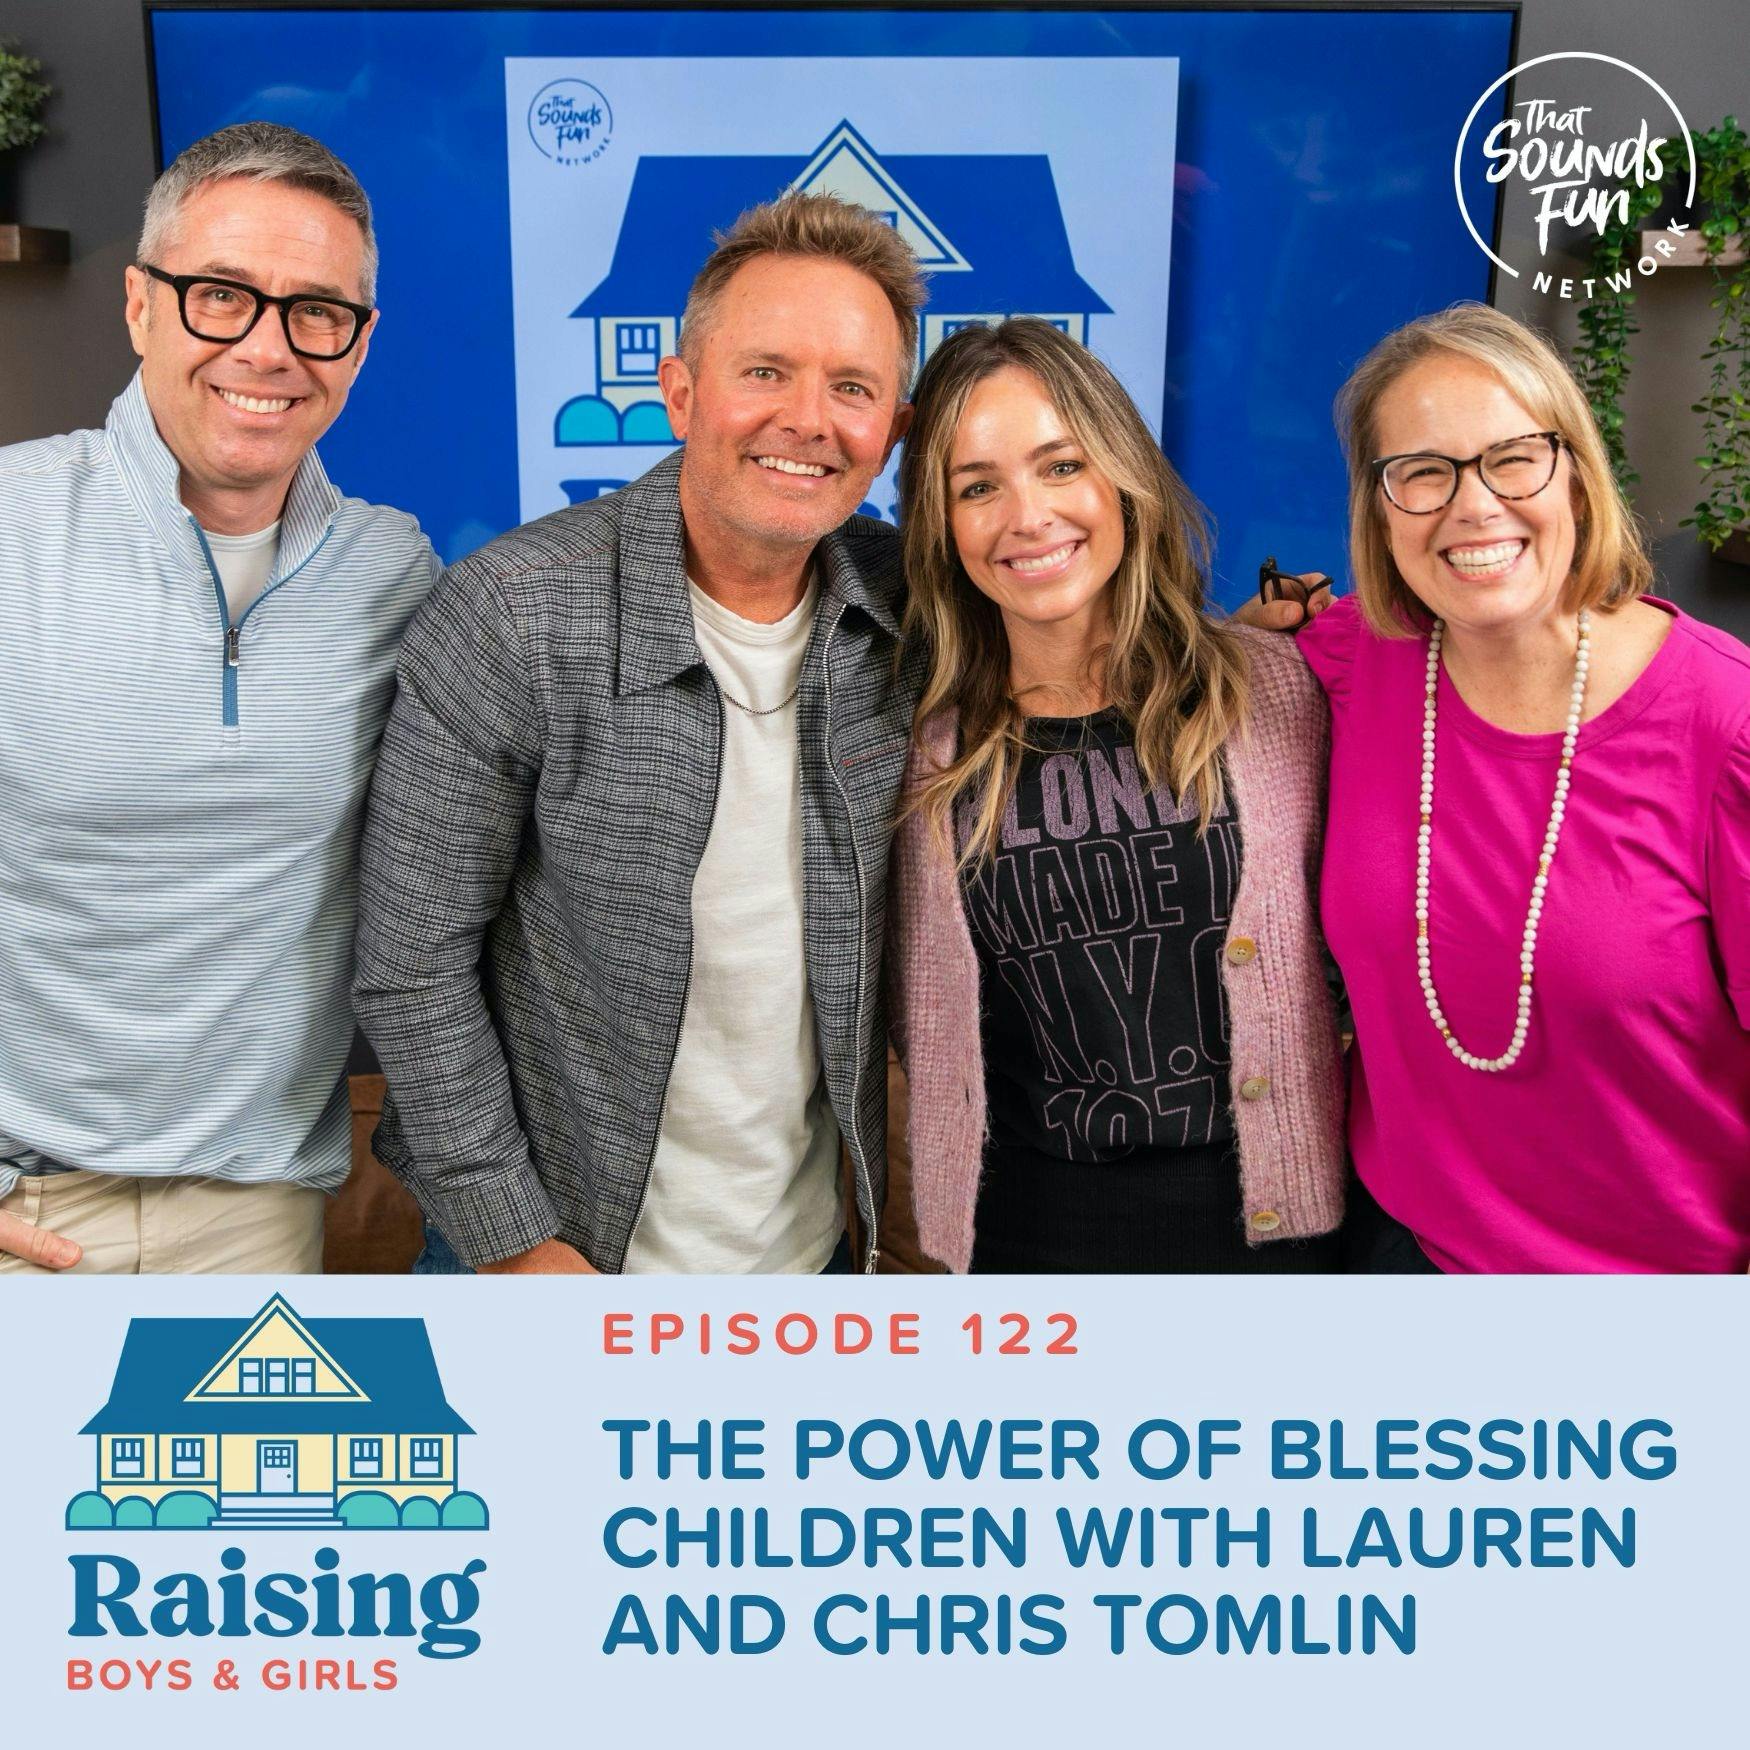 Episode 122: The Power of Blessing Children with Lauren and Chris Tomlin